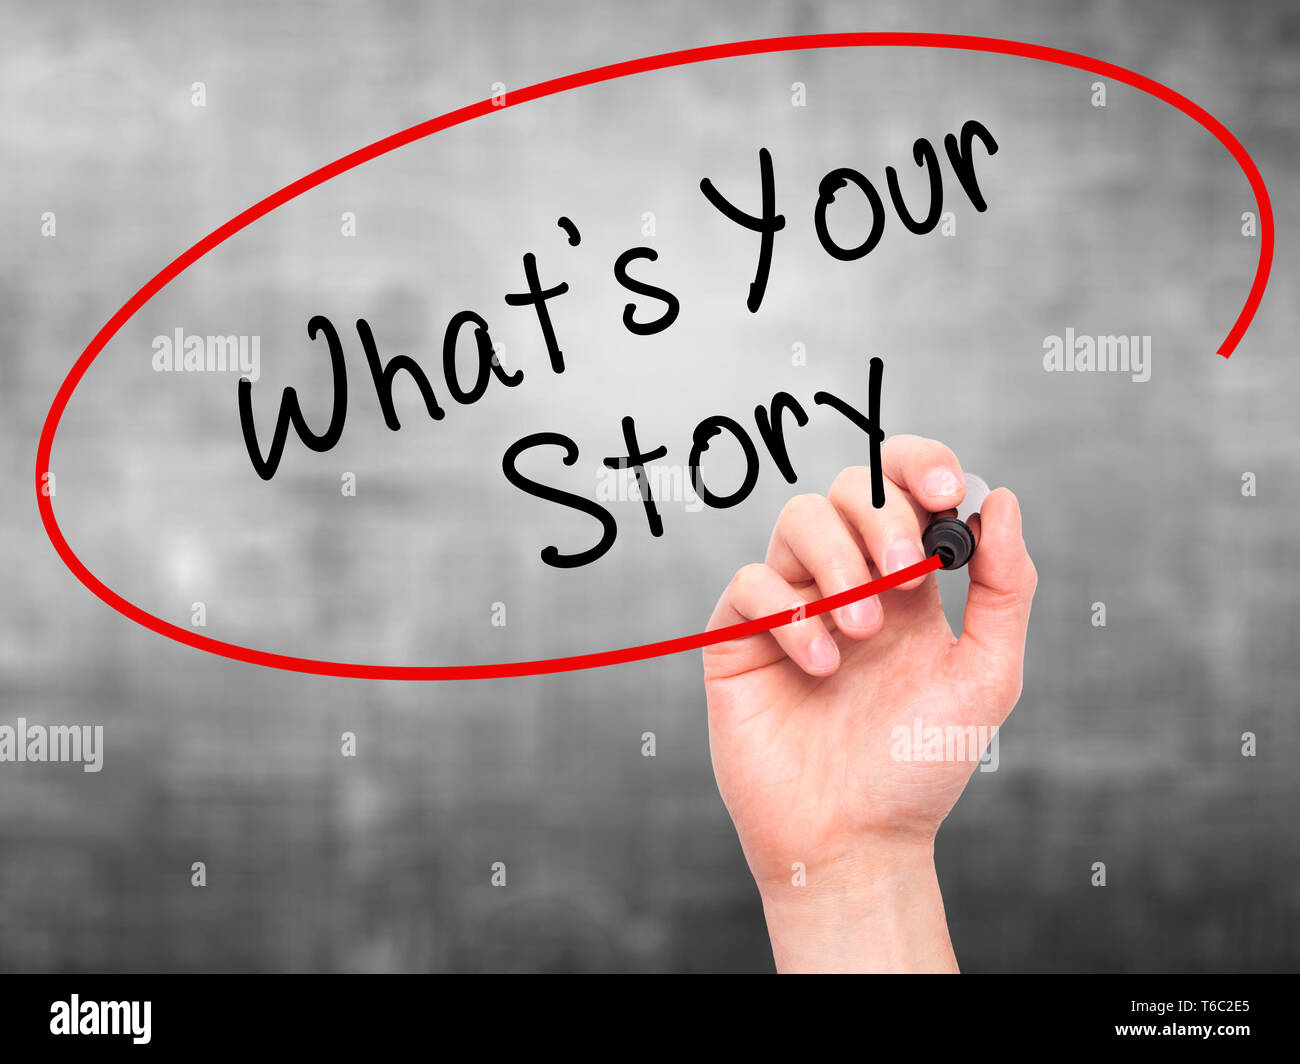 Man Hand writing What's Your Story with marker on transparent wipe board Stock Photo